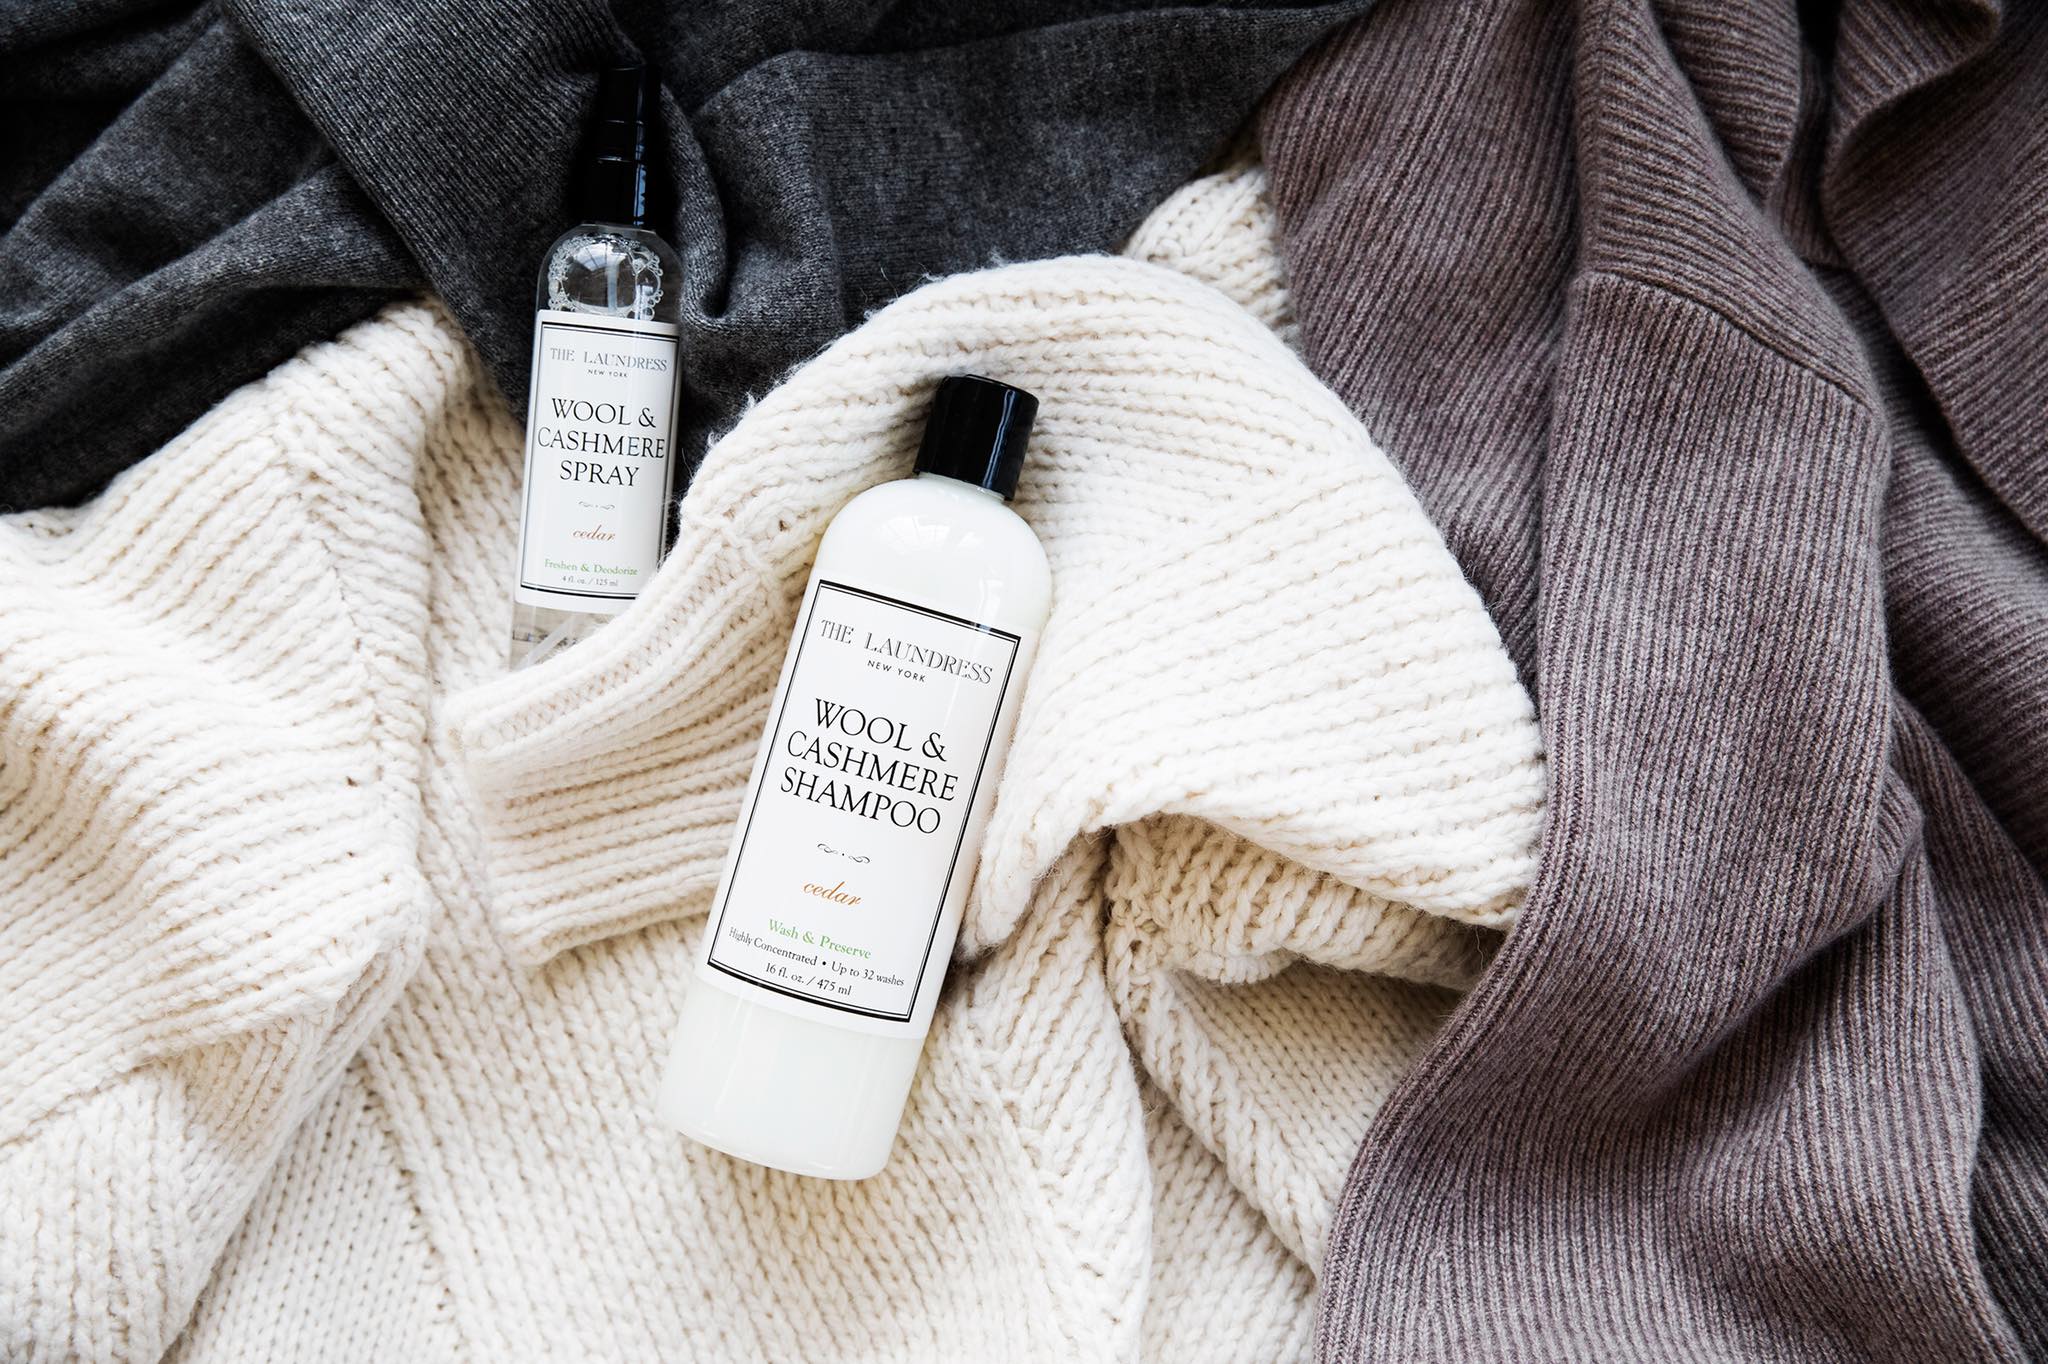 How to... Care for and clean your wool & cashmere